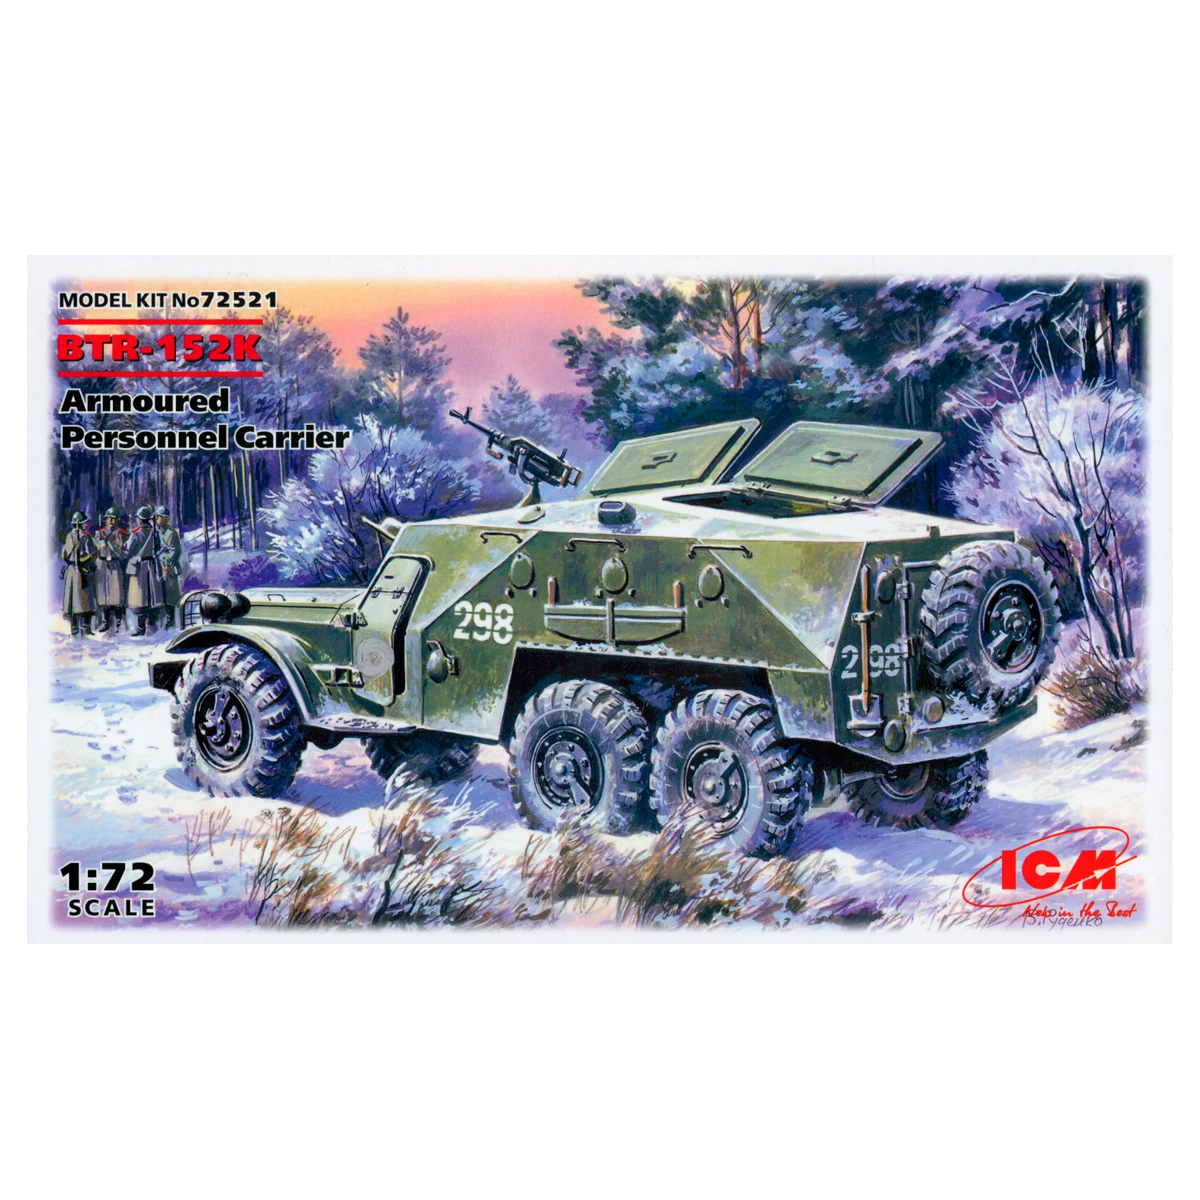 BTR-152K, Armoured Personnel Carrier 1/72